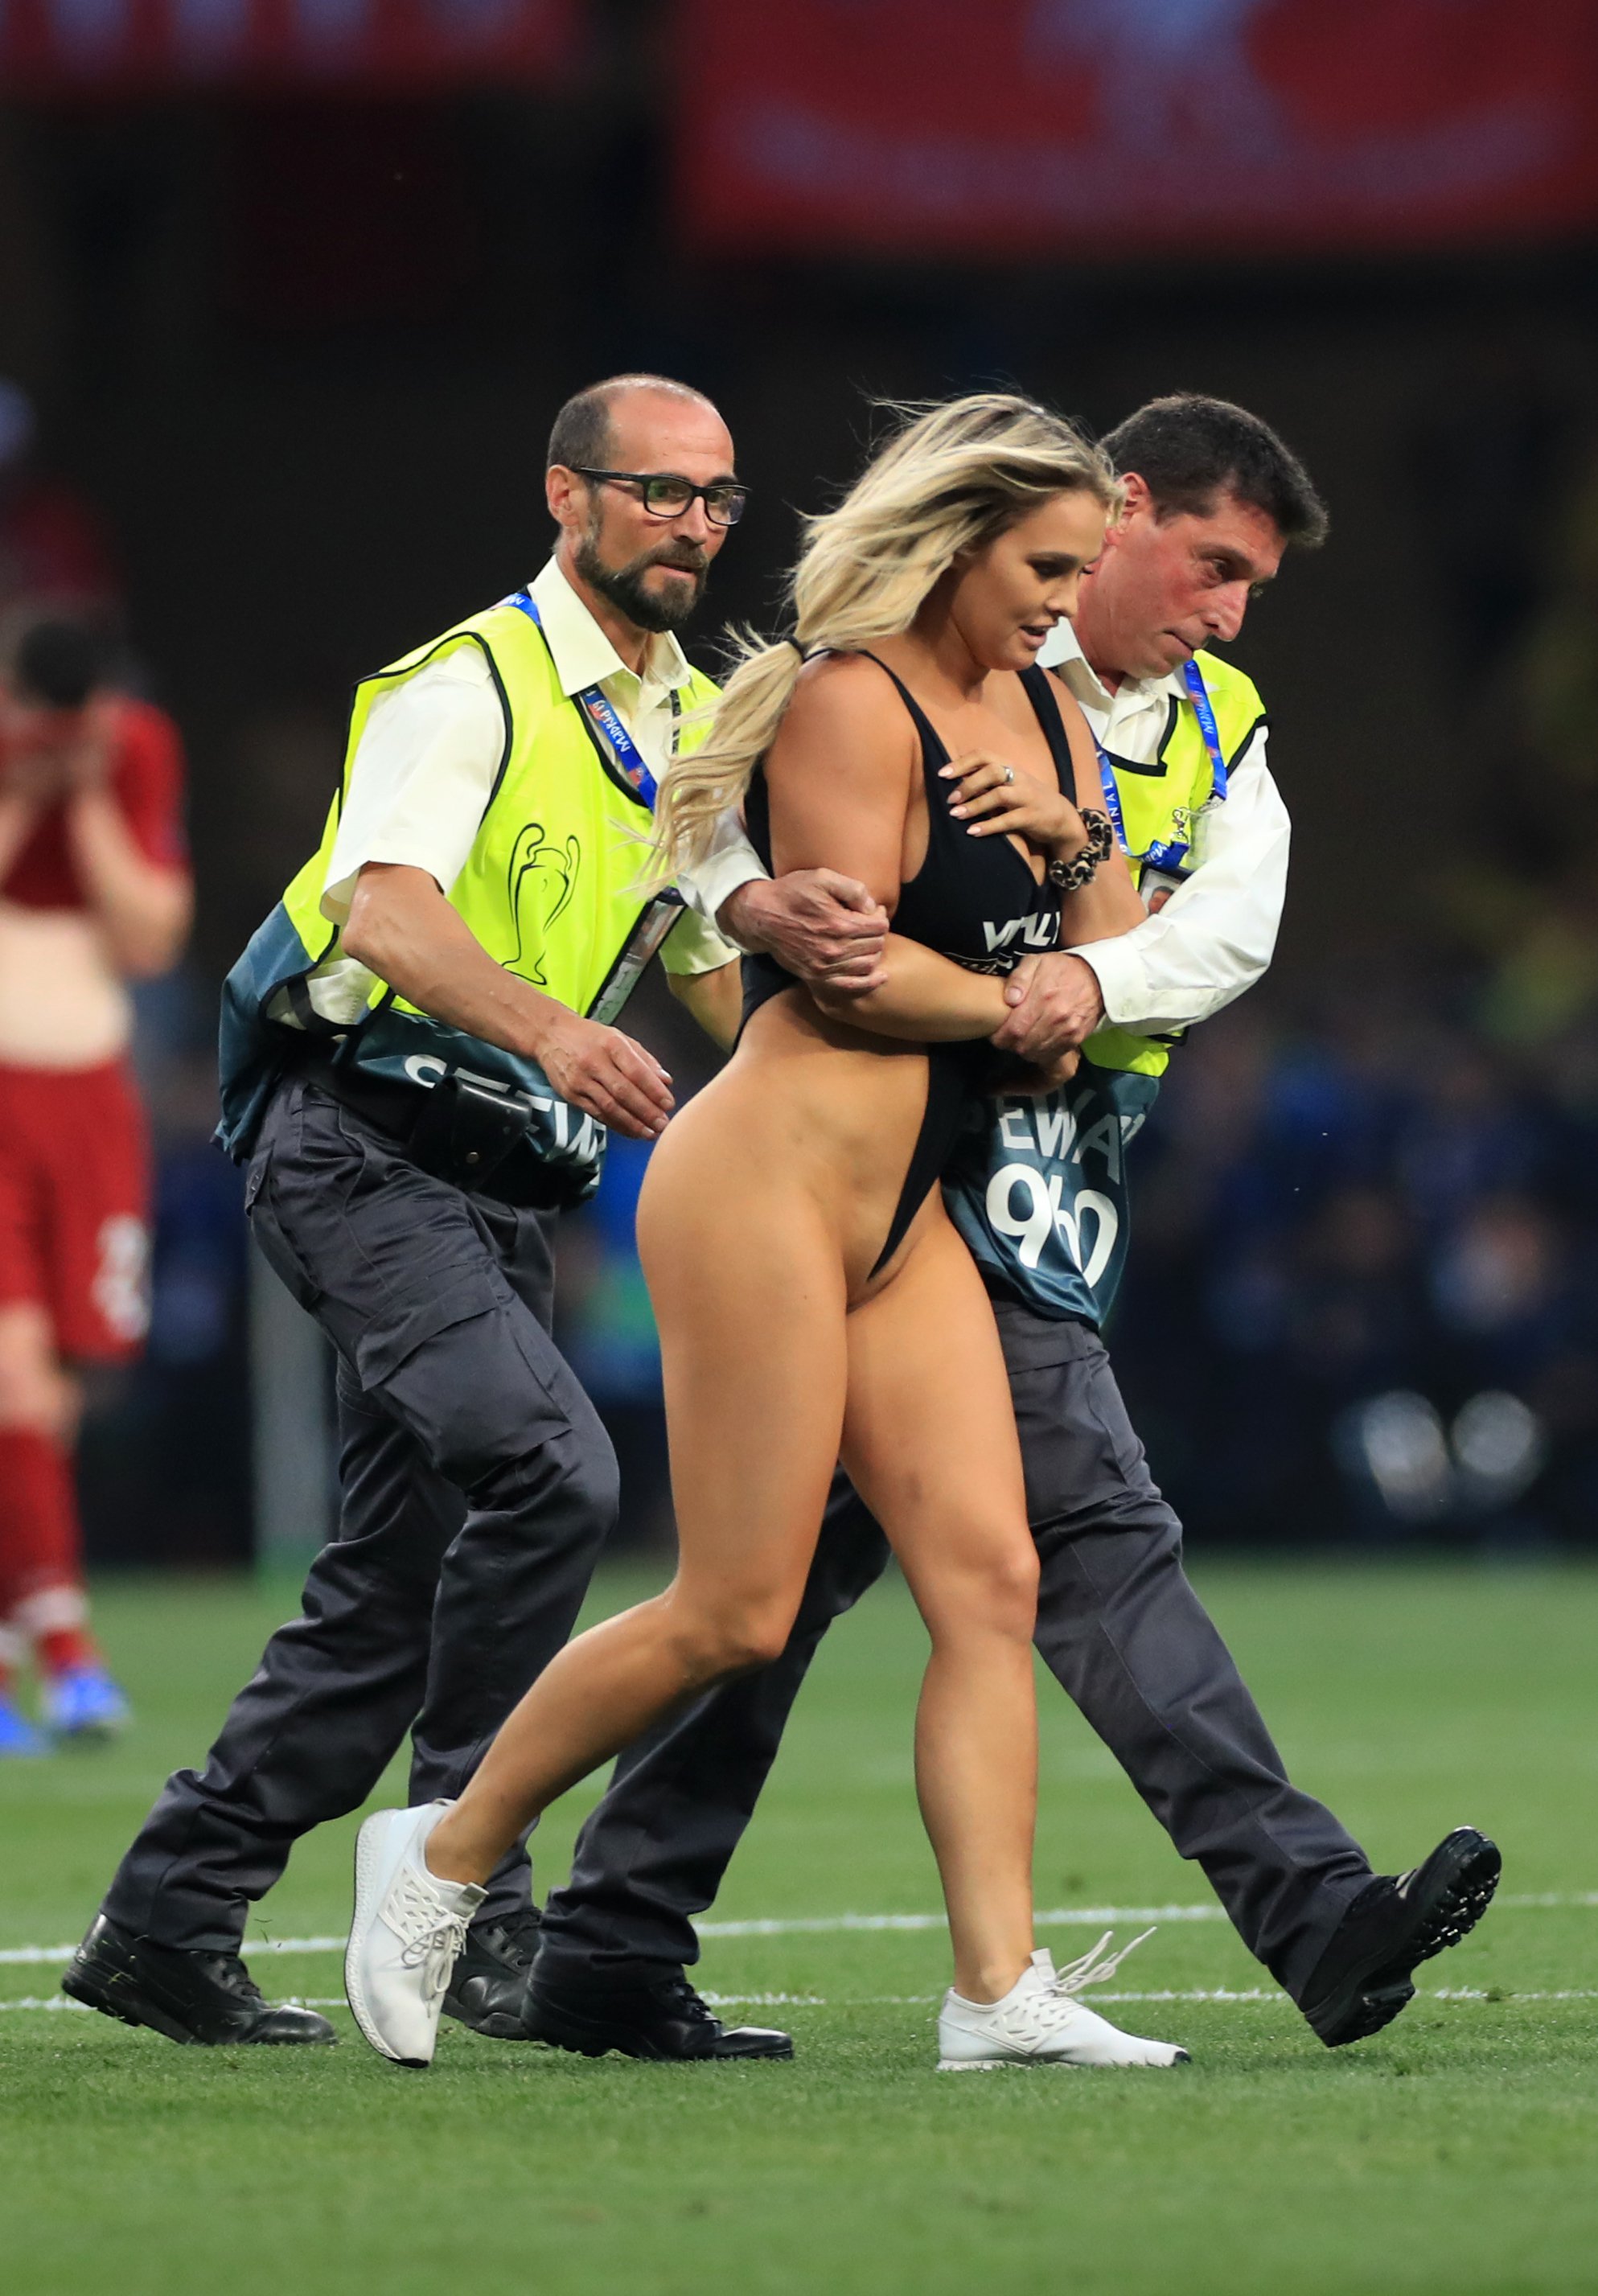 Pitch invader Kinsey Wolanski escorted out of the Wanda Metropolitano Stadium after she wore a skimpy swimsuit advertising a Russian porn pranking website during the UEFA Champions League final between Liverpool and Tottenham Hotspur, Madrid, June 1, 2019.